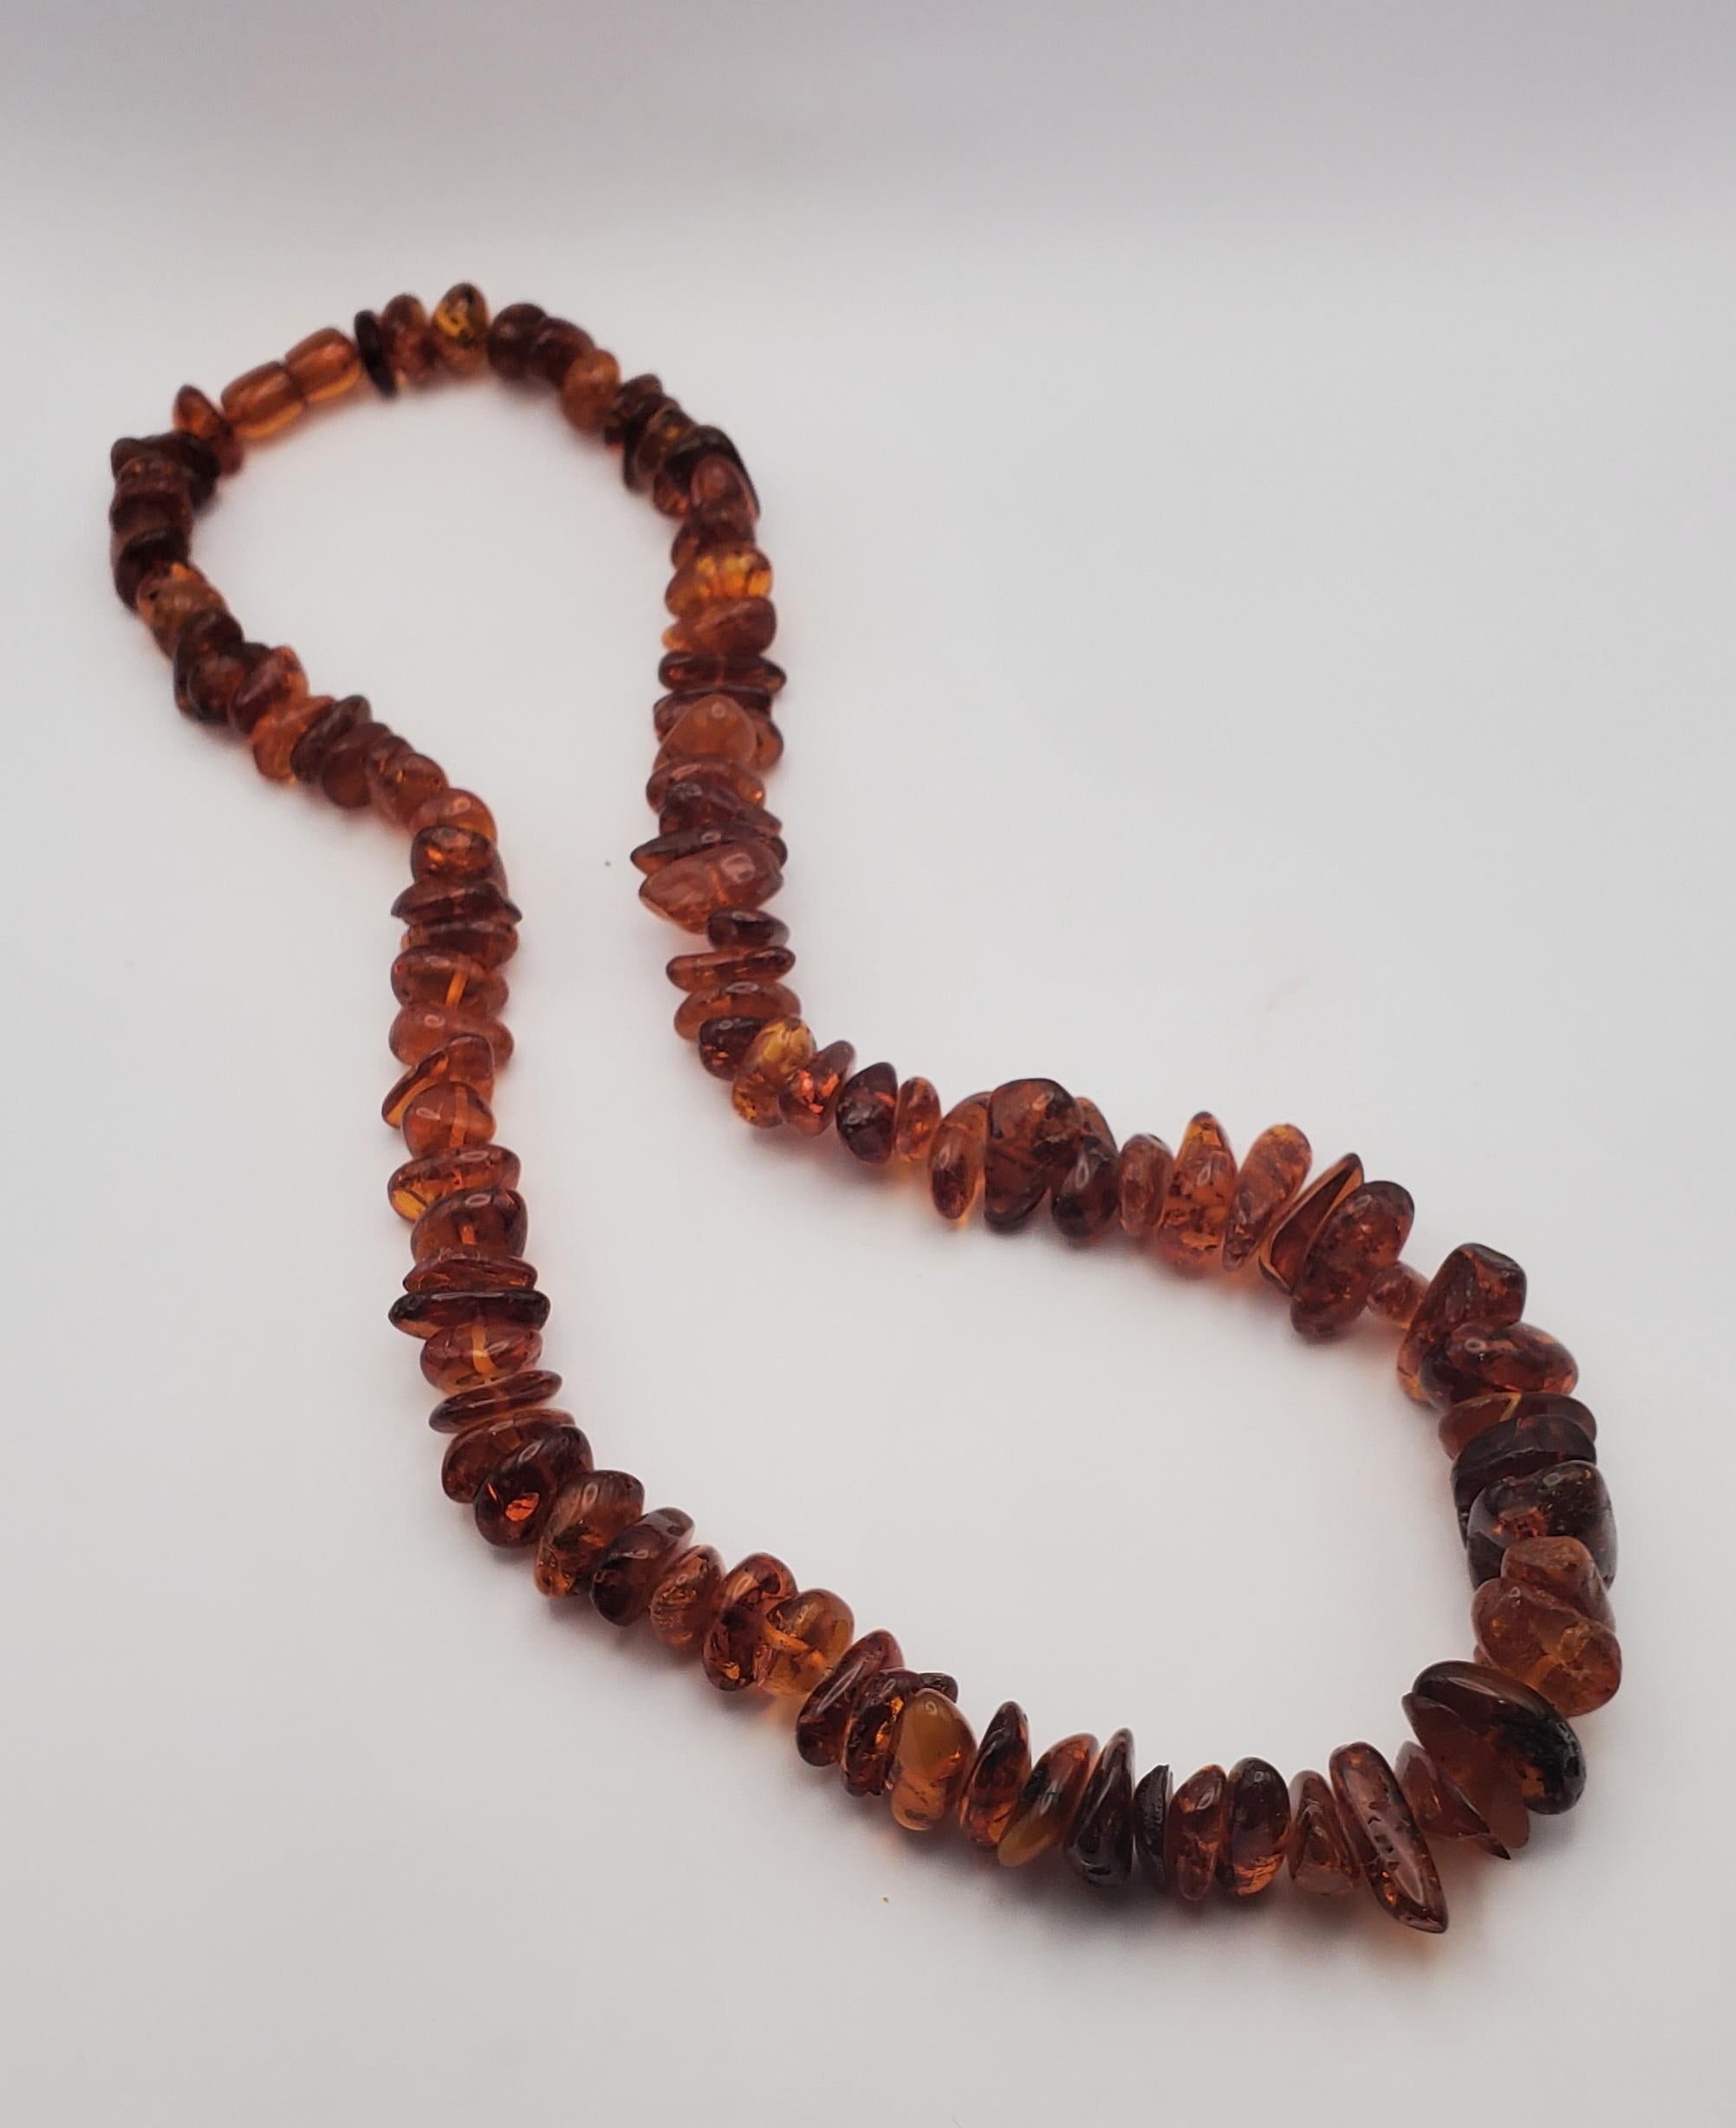 Vintage polished Polish amber bead necklace with a hidden barrel clasp. This beautiful graduated strand is from the 1930s and measures 24